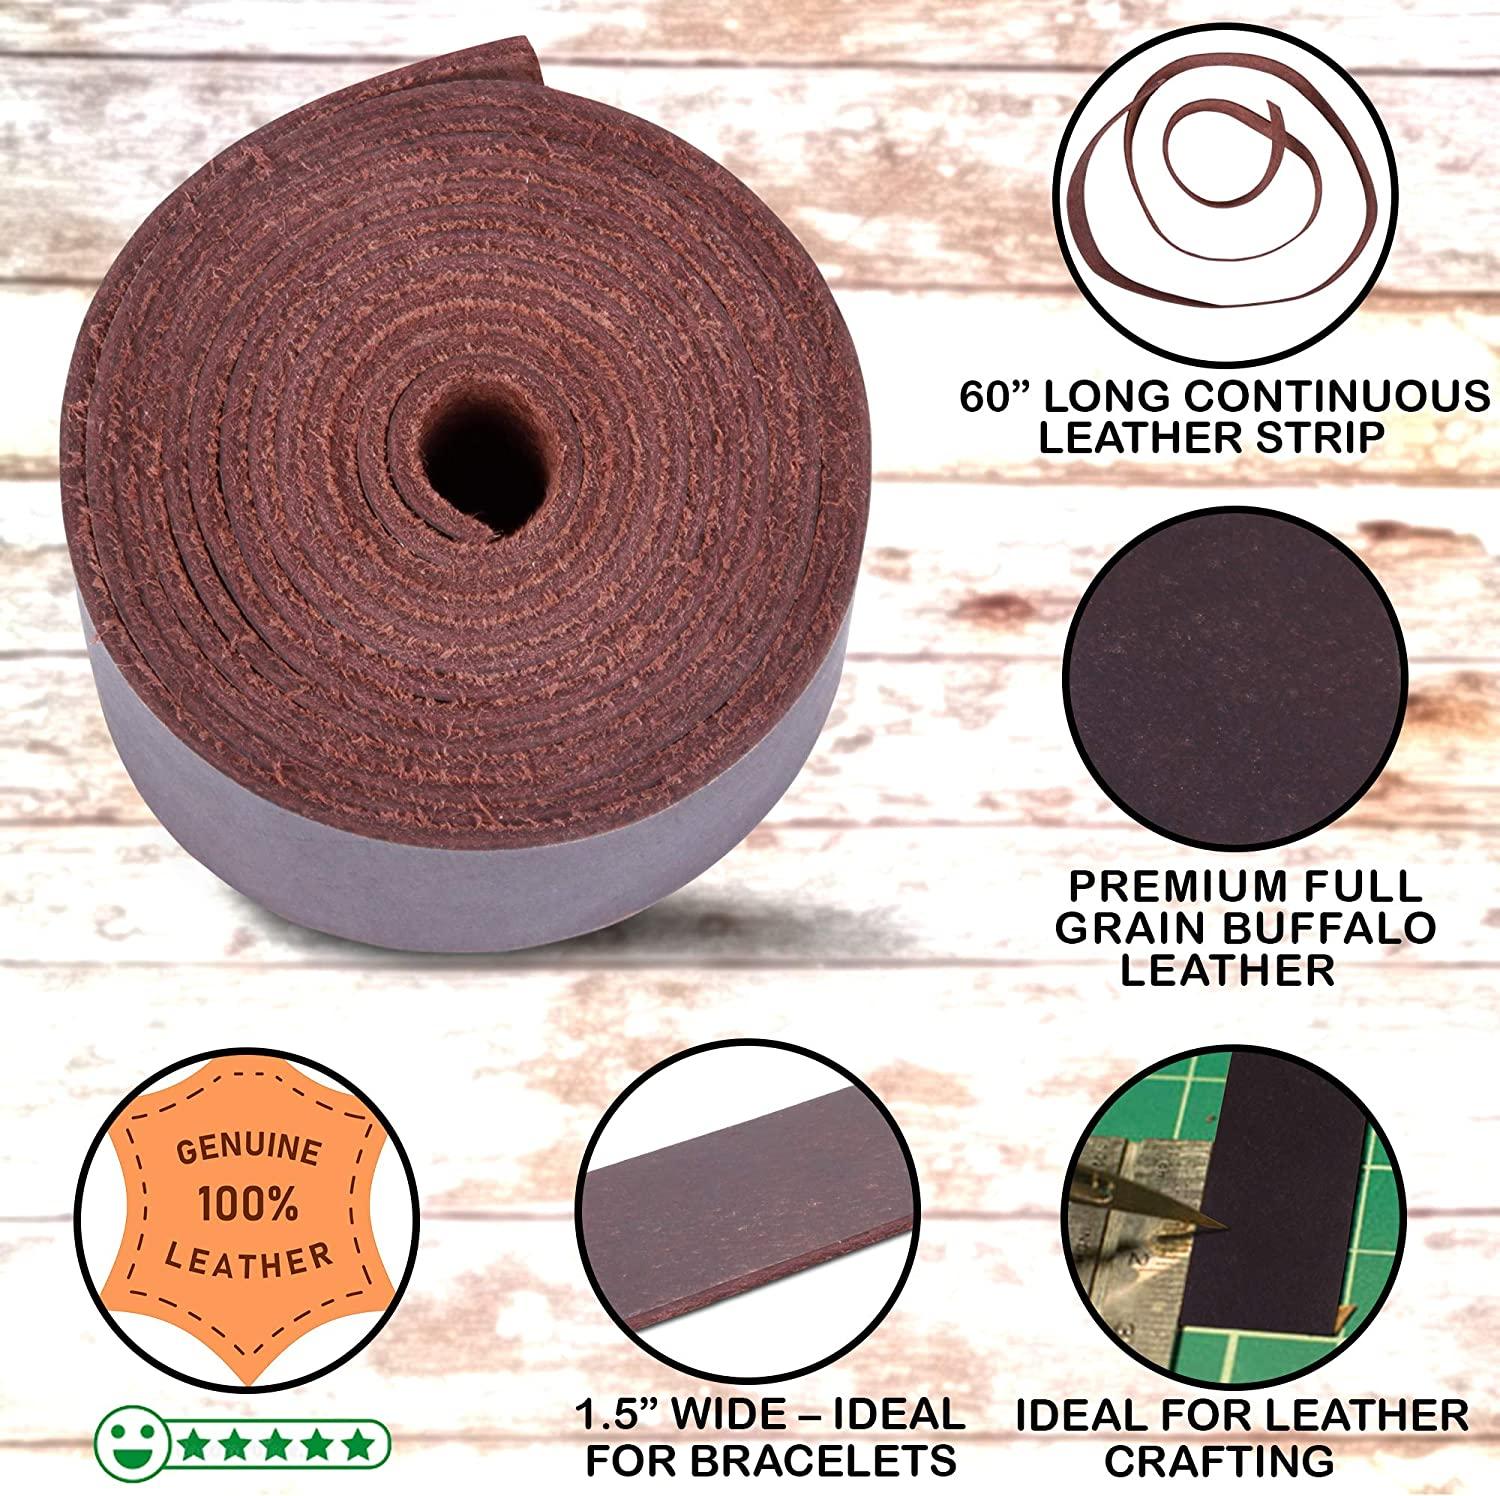 Leather Strap - Full Grain Buffalo Leather Strips for Crafts Brown Leather  Straps Ideal for Arts and Crafts, Tooling, Jewelry, DIY Home Decor, & More  - Durable Tooling Leather Strip (1.5 x 60)